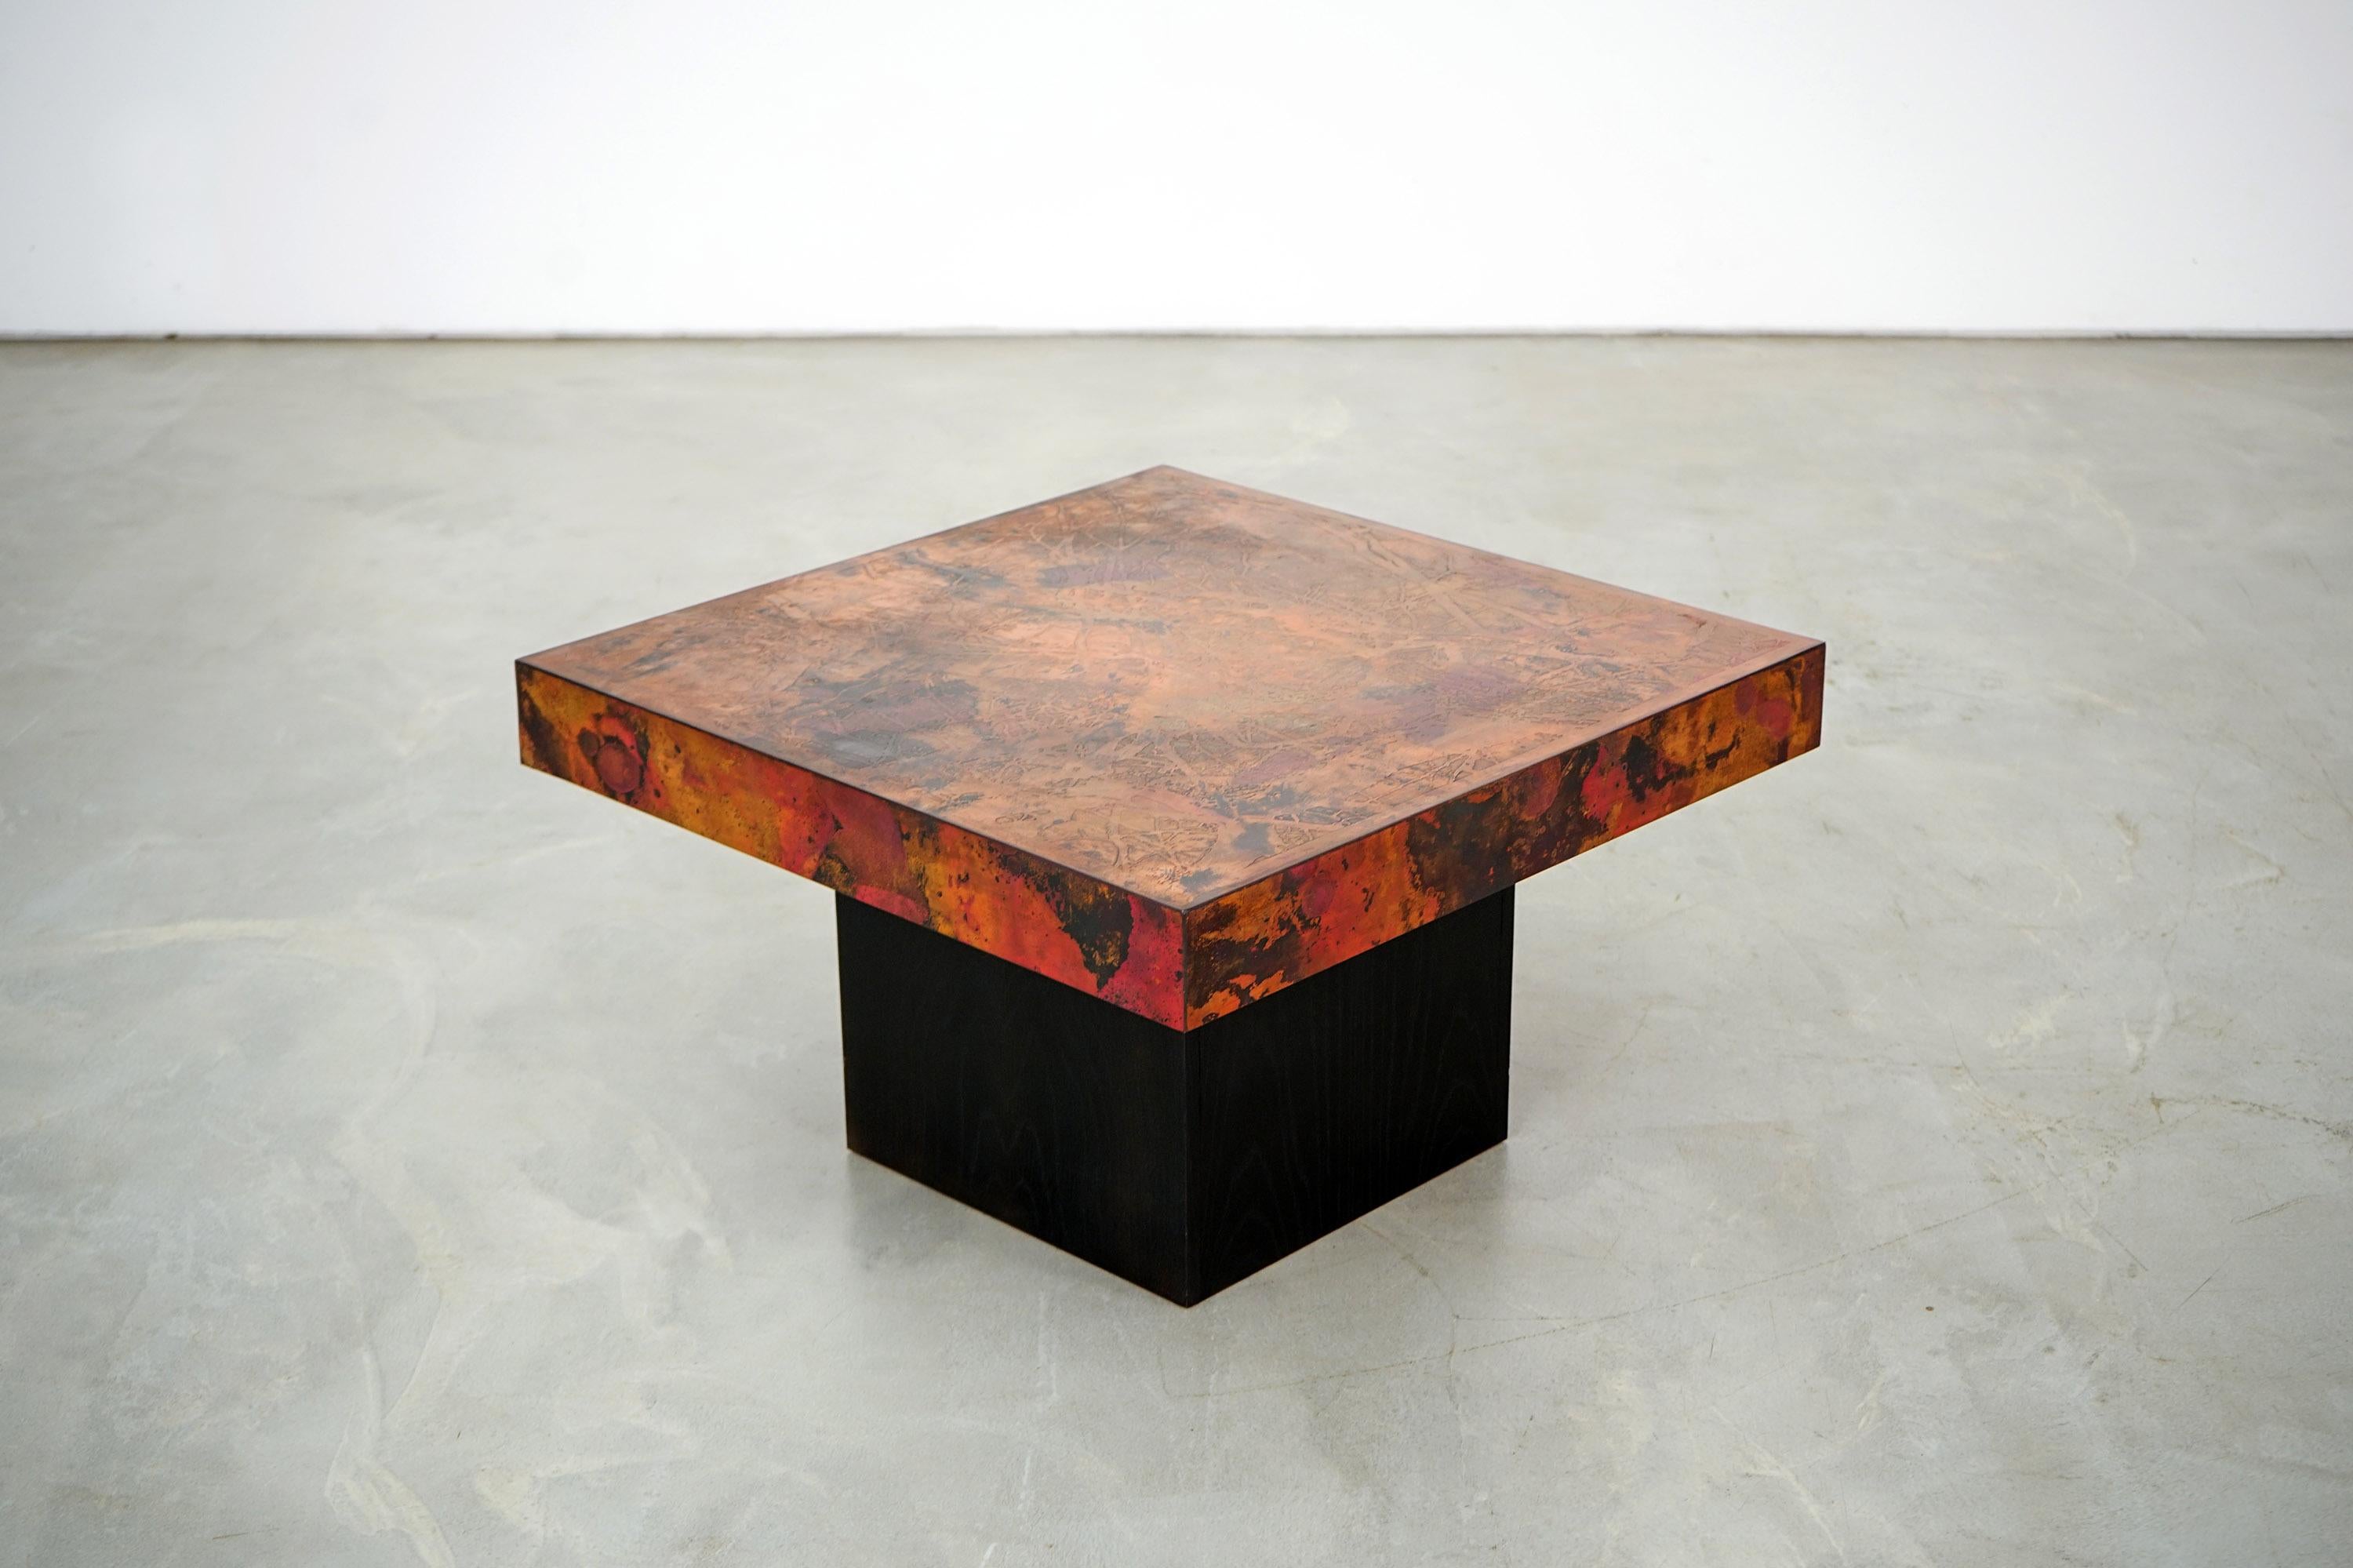 German Coffee Table by Bernhard Rohne, 1966, Oxidized and Etched Copper